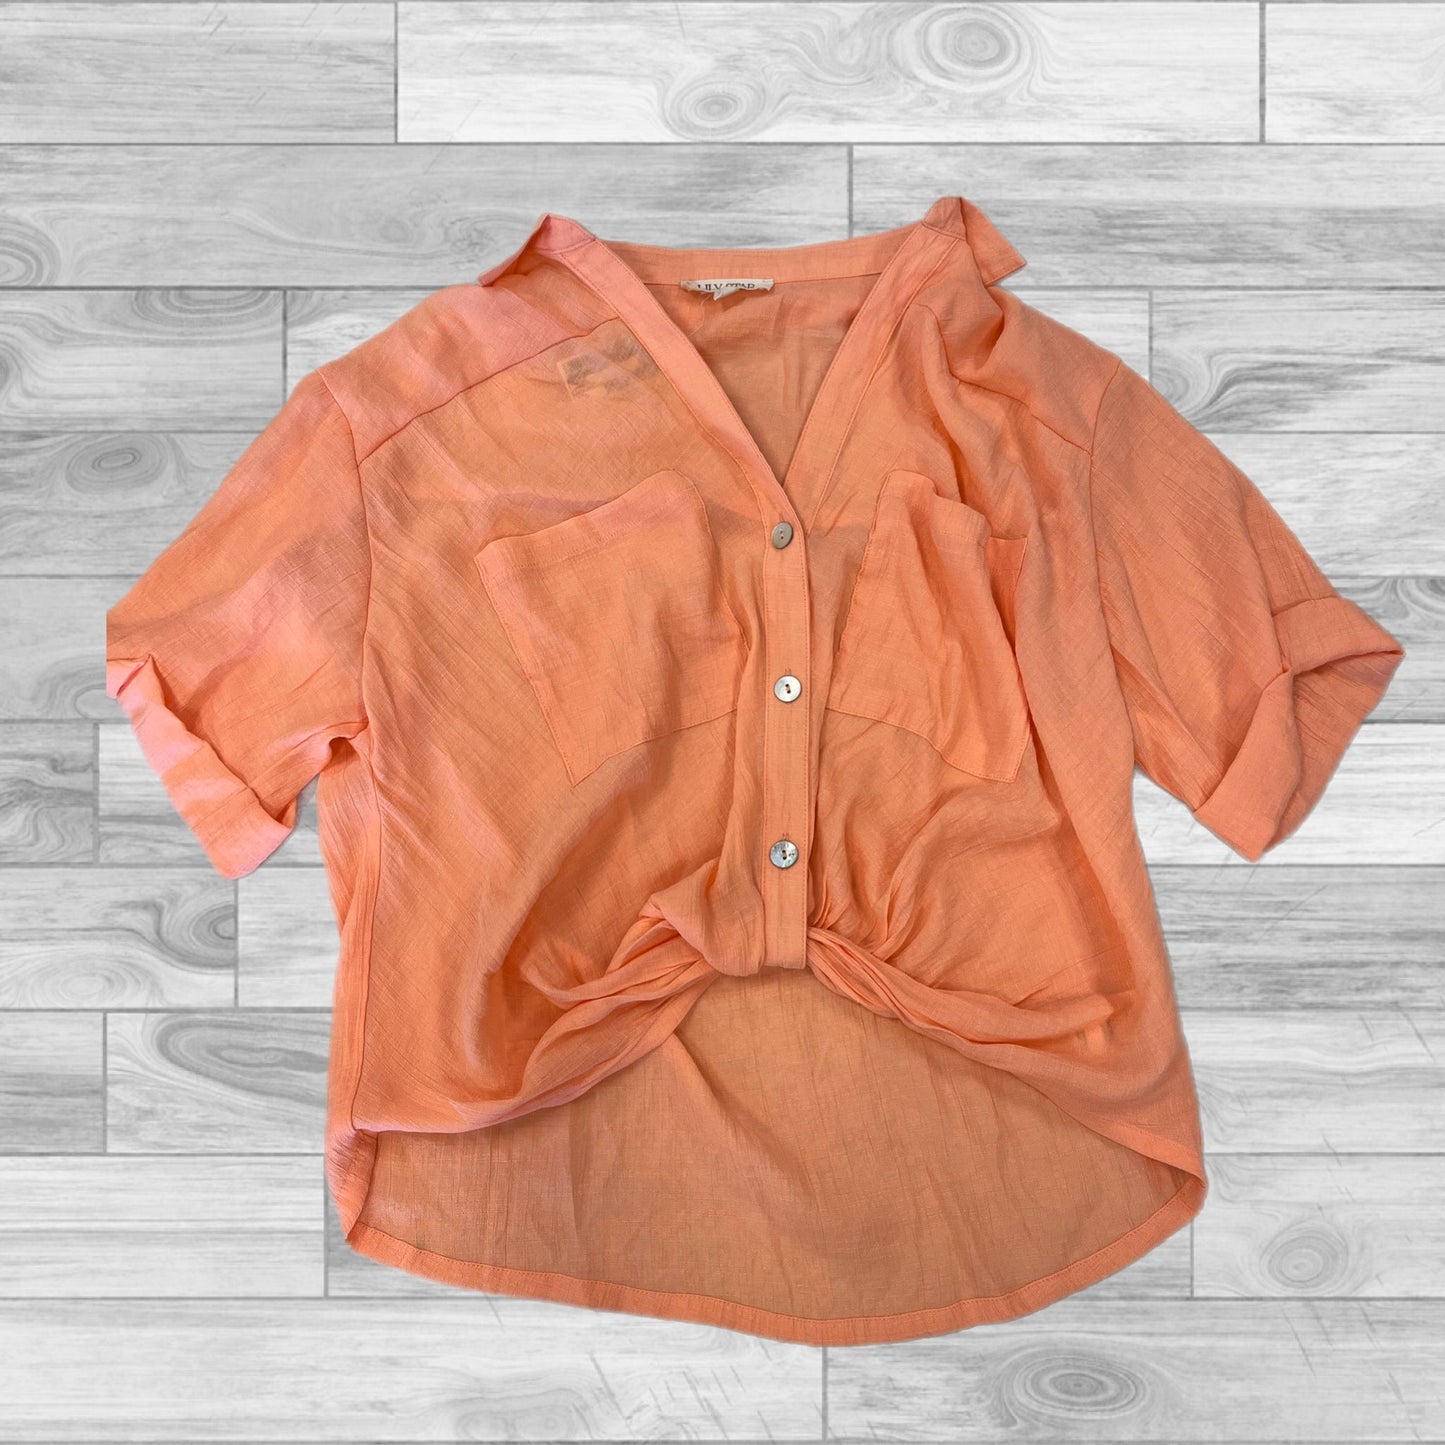 Coral Top Short Sleeve Clothes Mentor, Size L